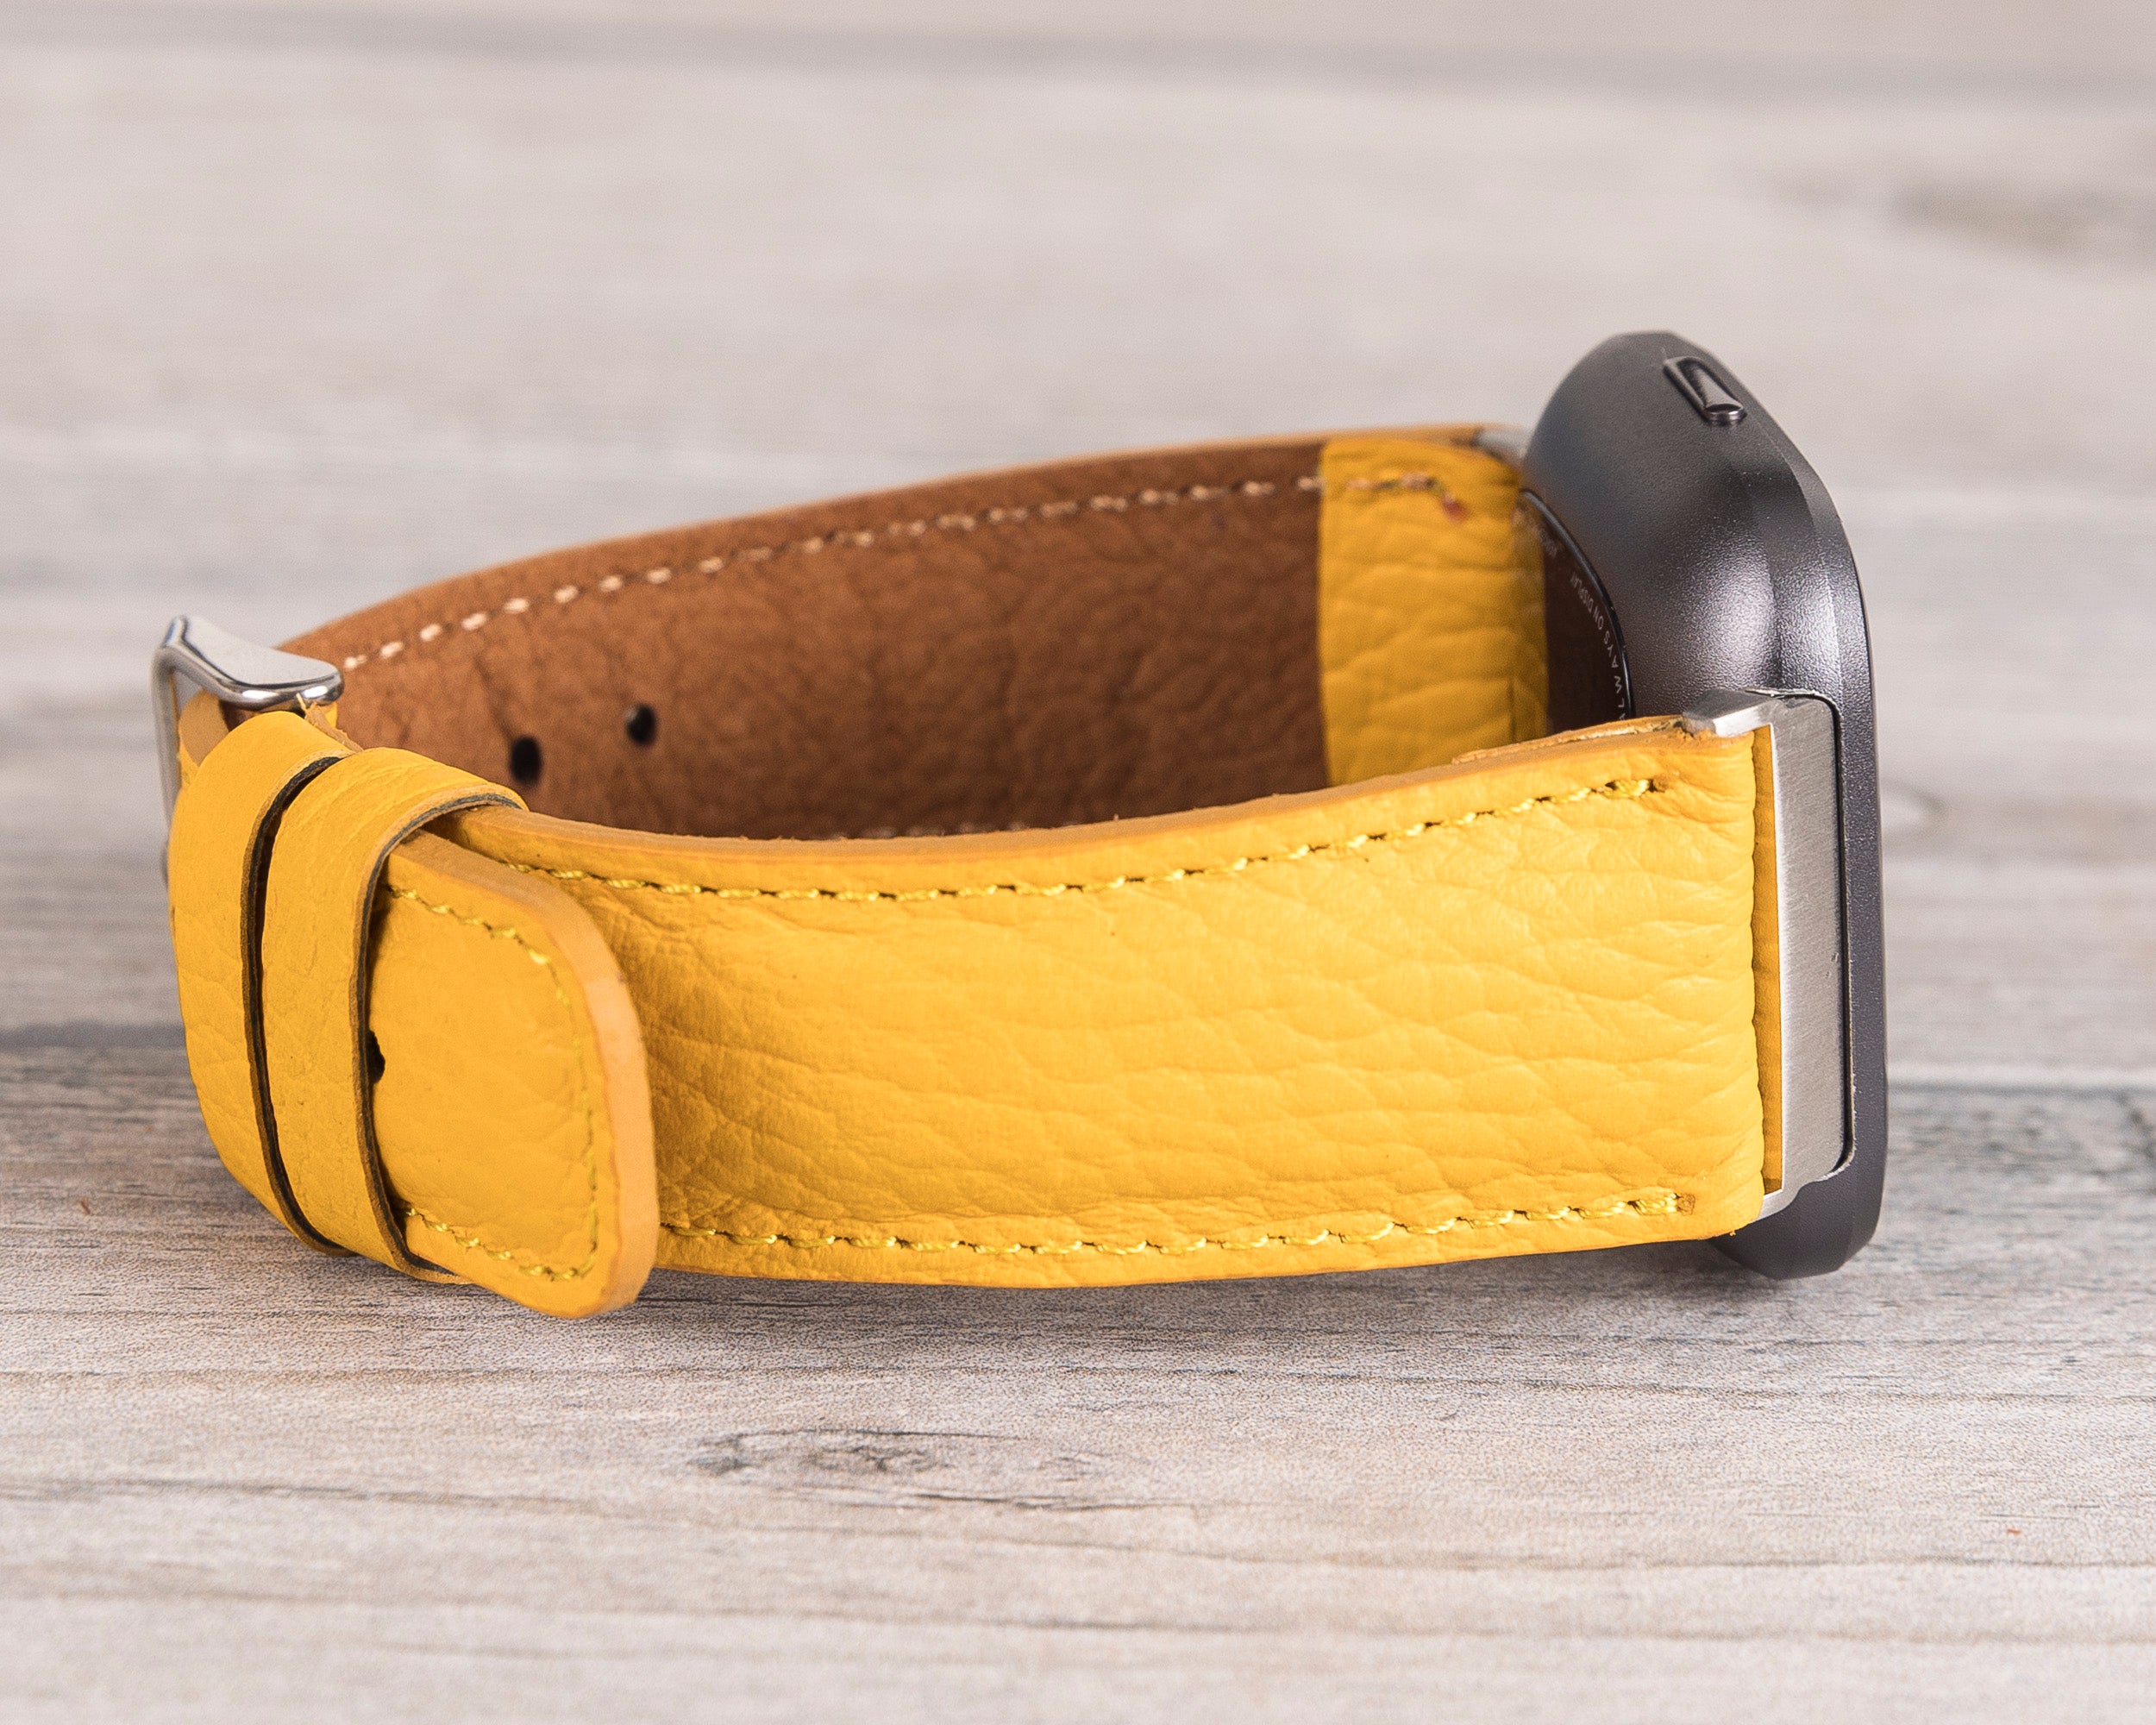 Yellow Leather Band for Fitbit Watch